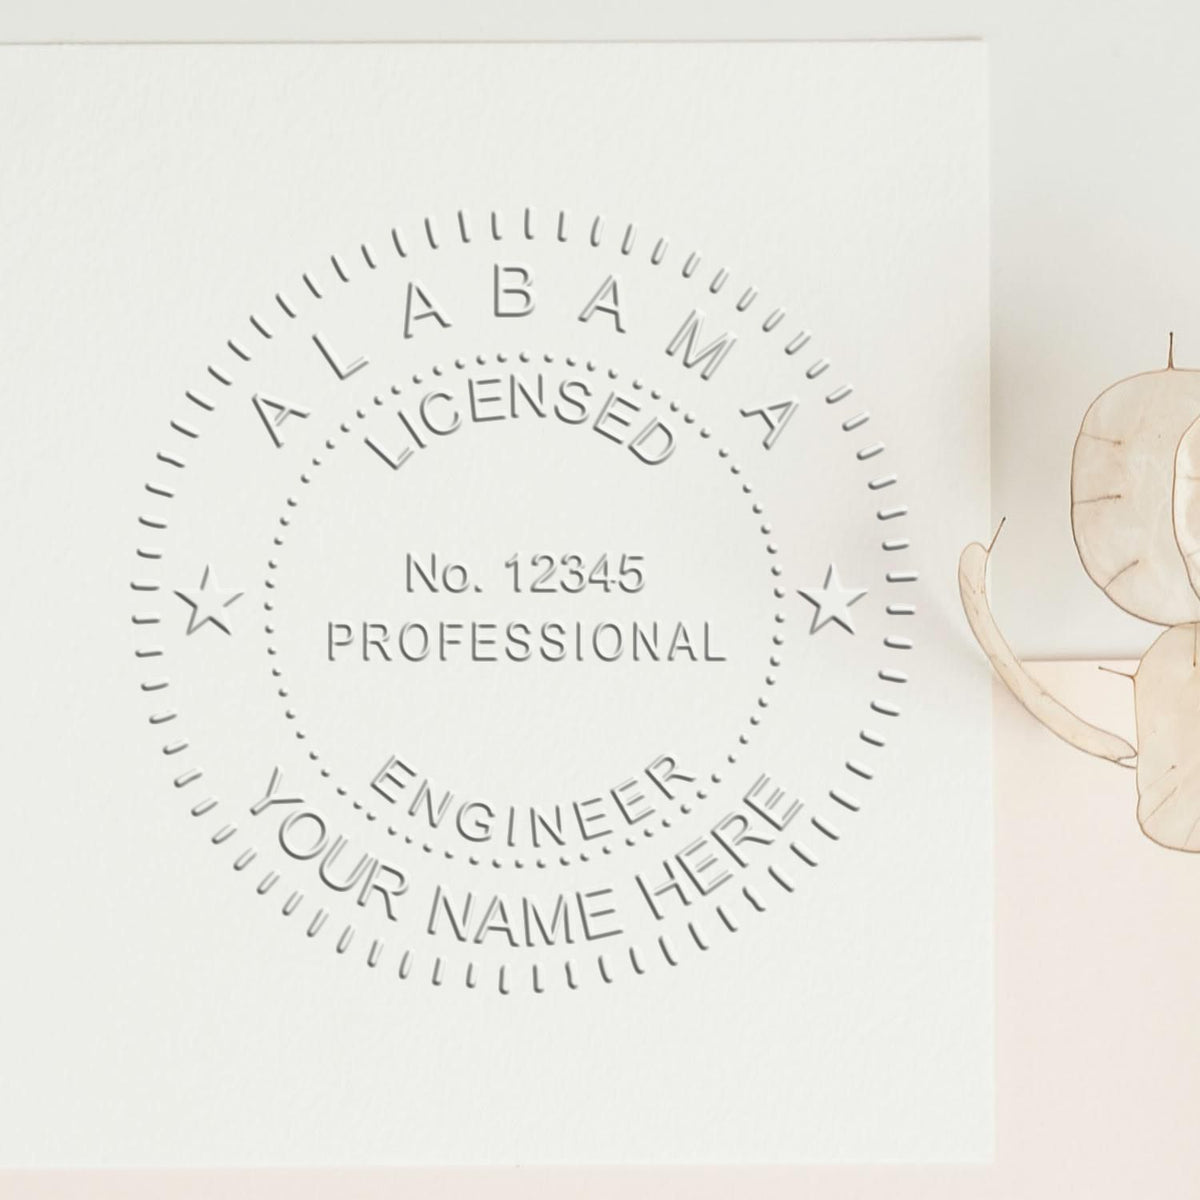 An alternative view of the Heavy Duty Cast Iron Alabama Engineer Seal Embosser stamped on a sheet of paper showing the image in use